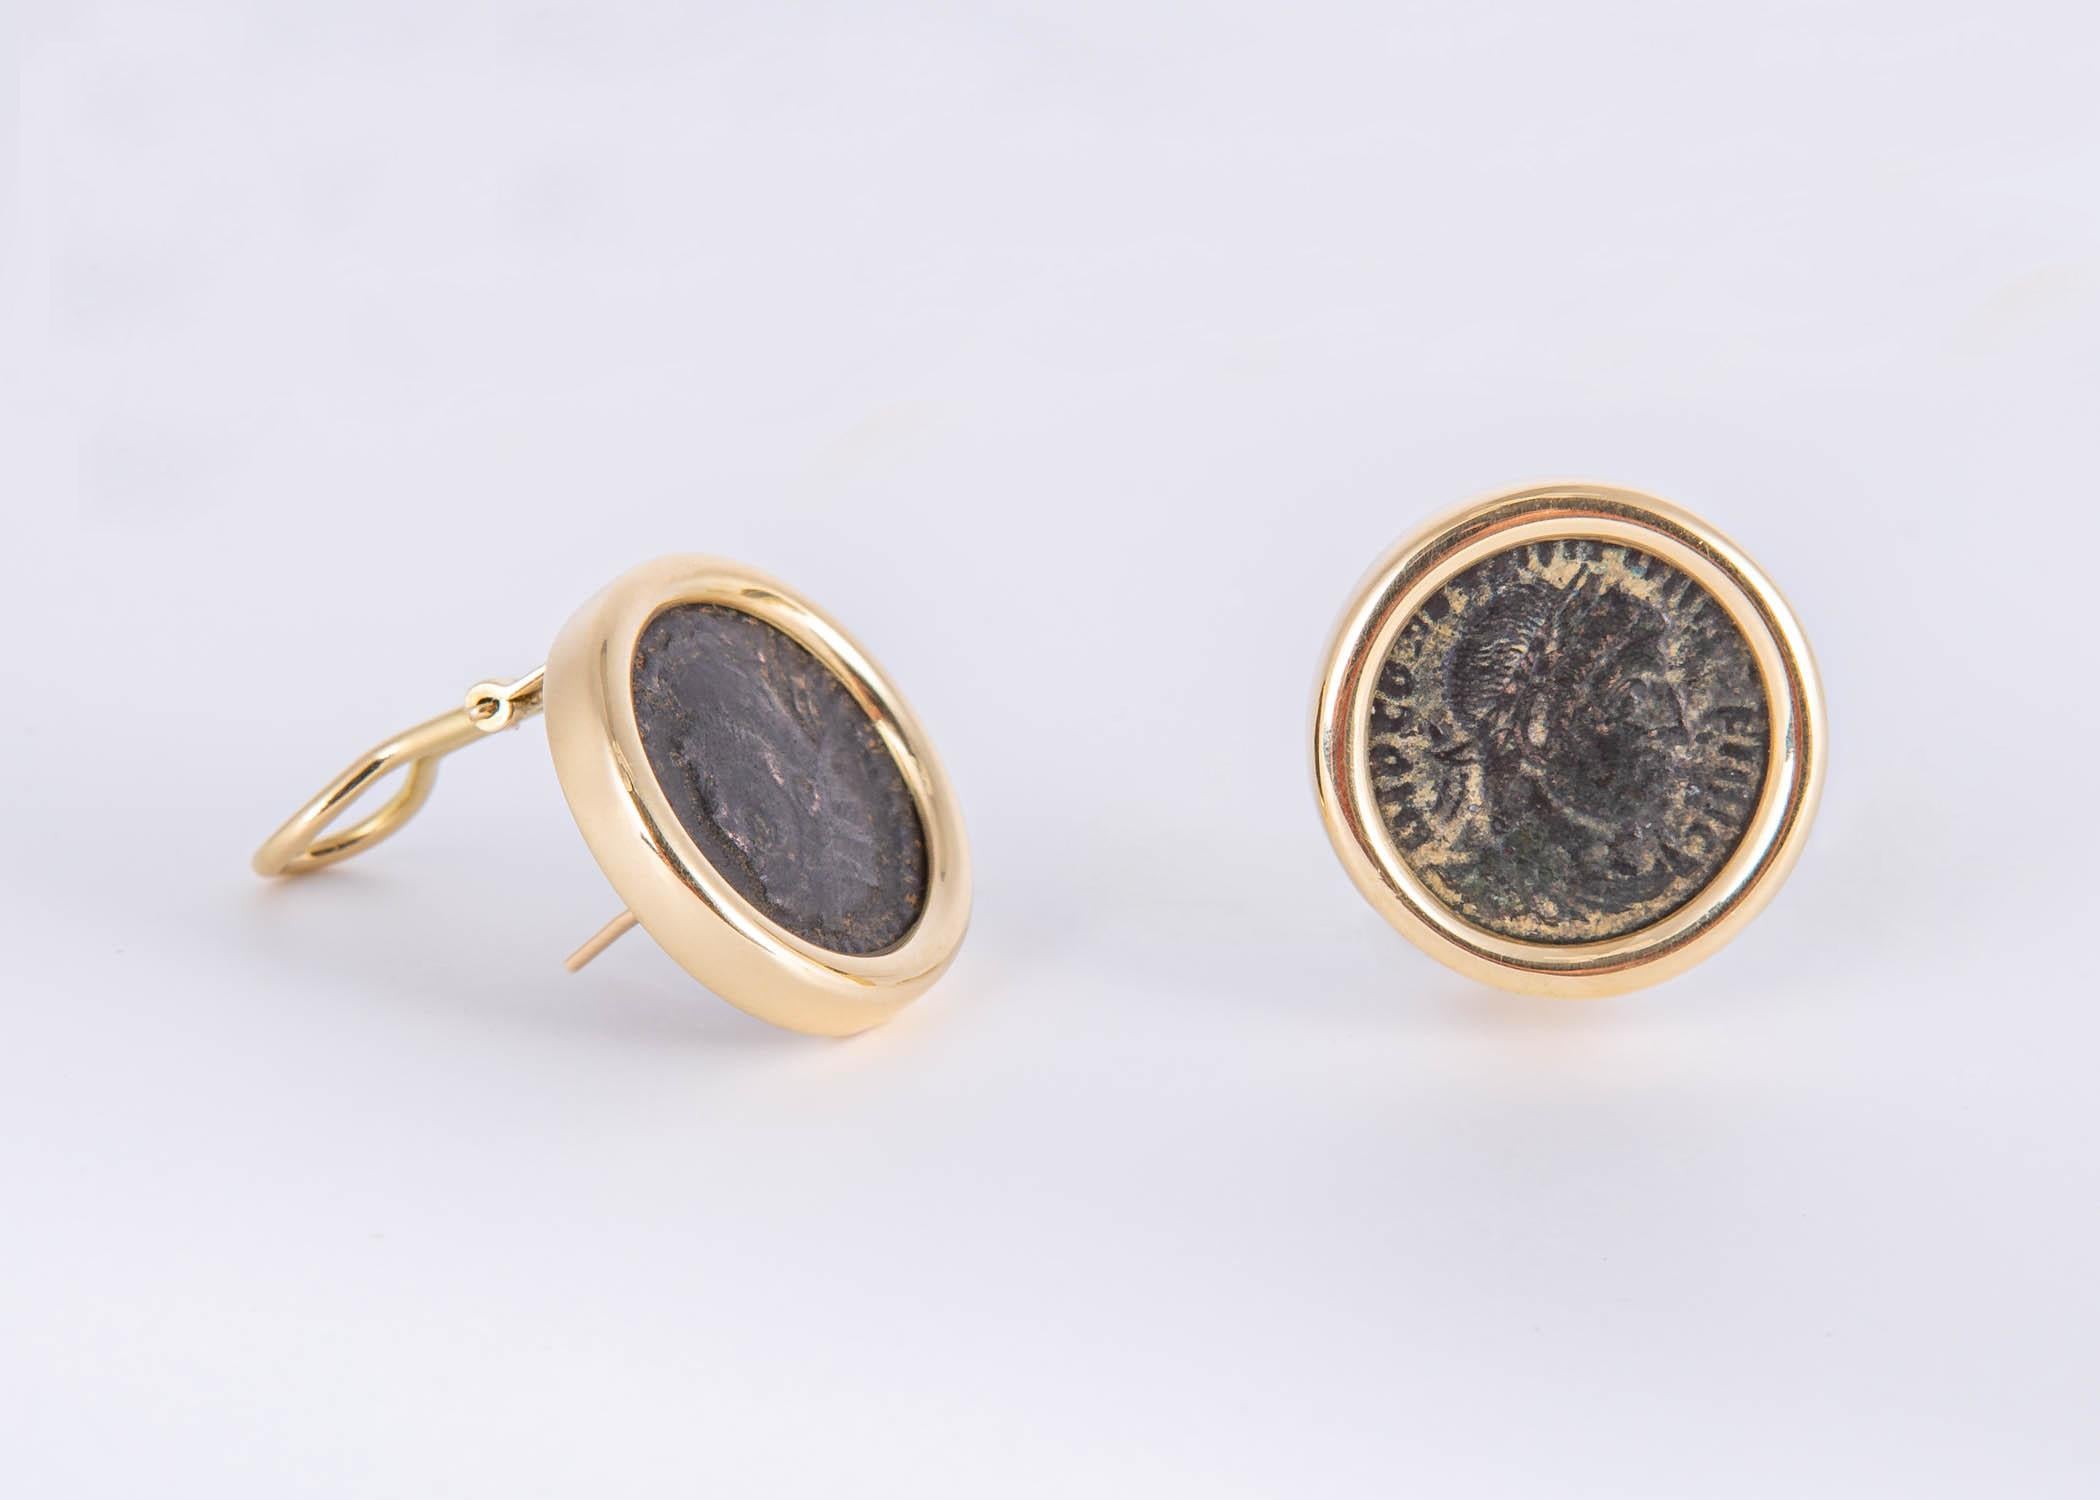 A style that iconic Italian jeweler Bvlgari made popular. A pair of ancient coins are framed with heavy 18k bezels to create a wearable chic style. 7/8's of an inch in size.